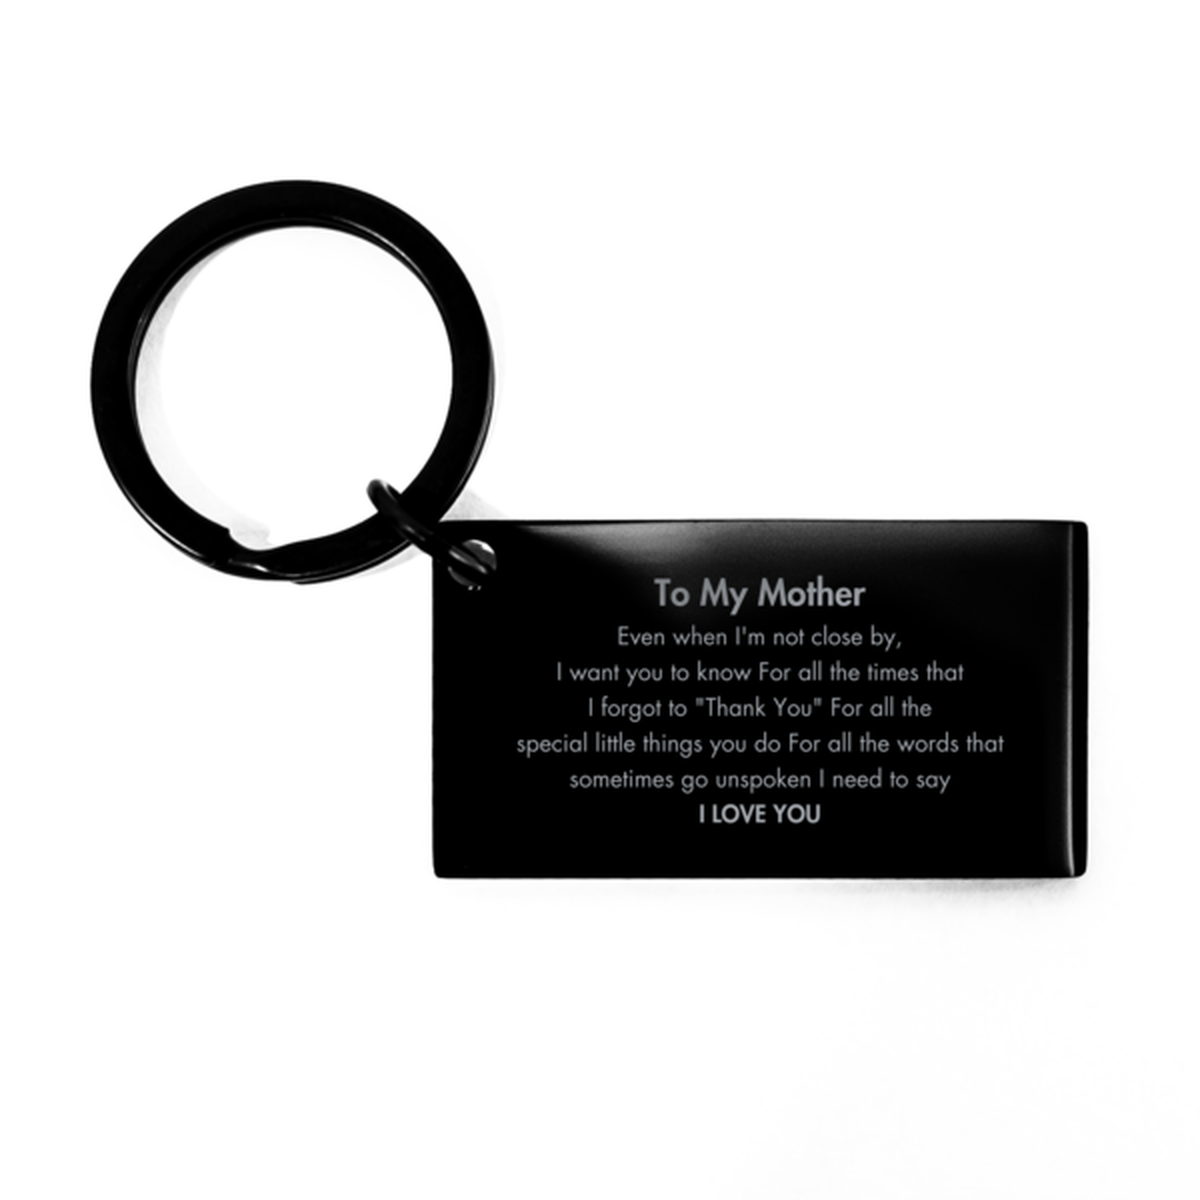 Thank You Gifts for Mother, Keepsake Keychain Gifts for Mother Birthday Mother's day Father's Day Mother For all the words That sometimes go unspoken I need to say I LOVE YOU